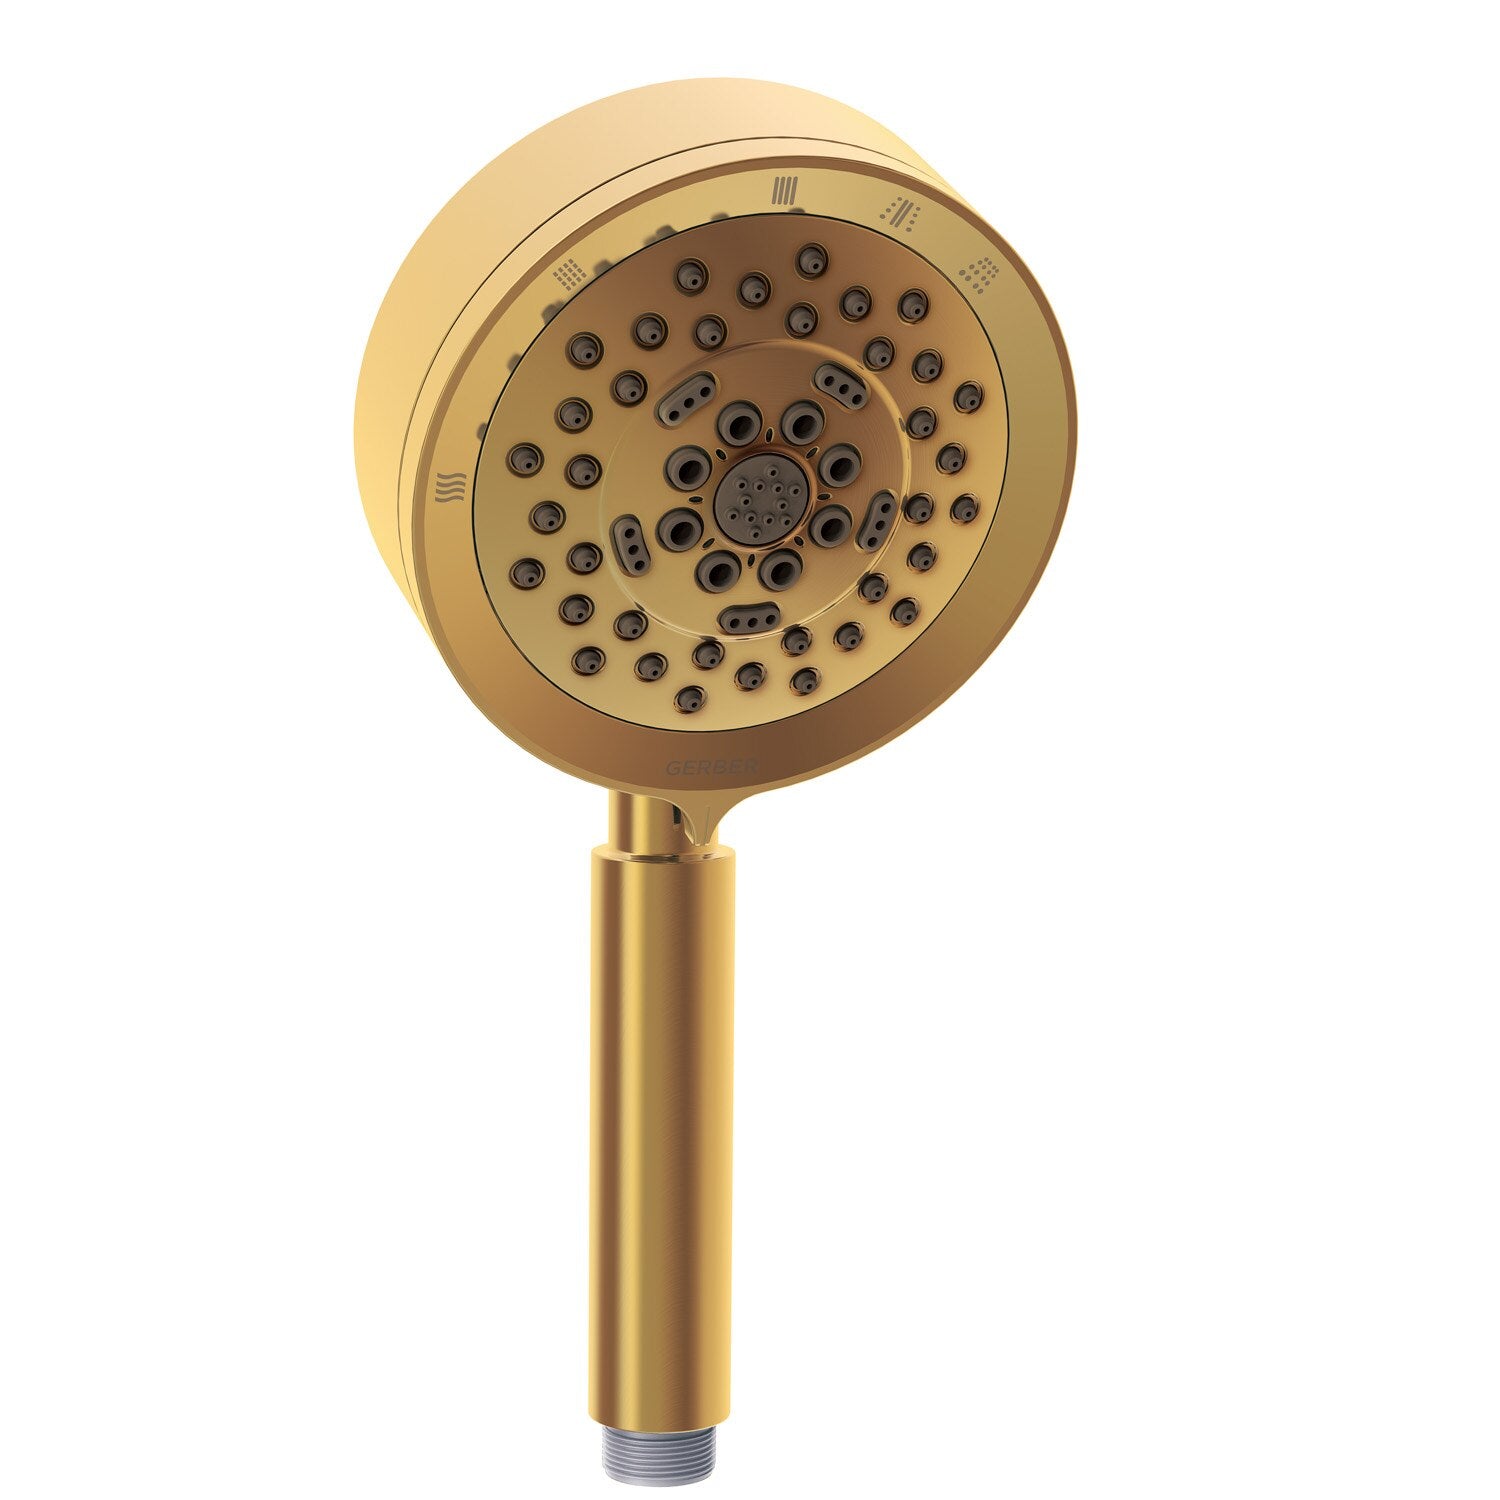 Danze by Gerber Parma 5 Function Handshower 1.5gpm